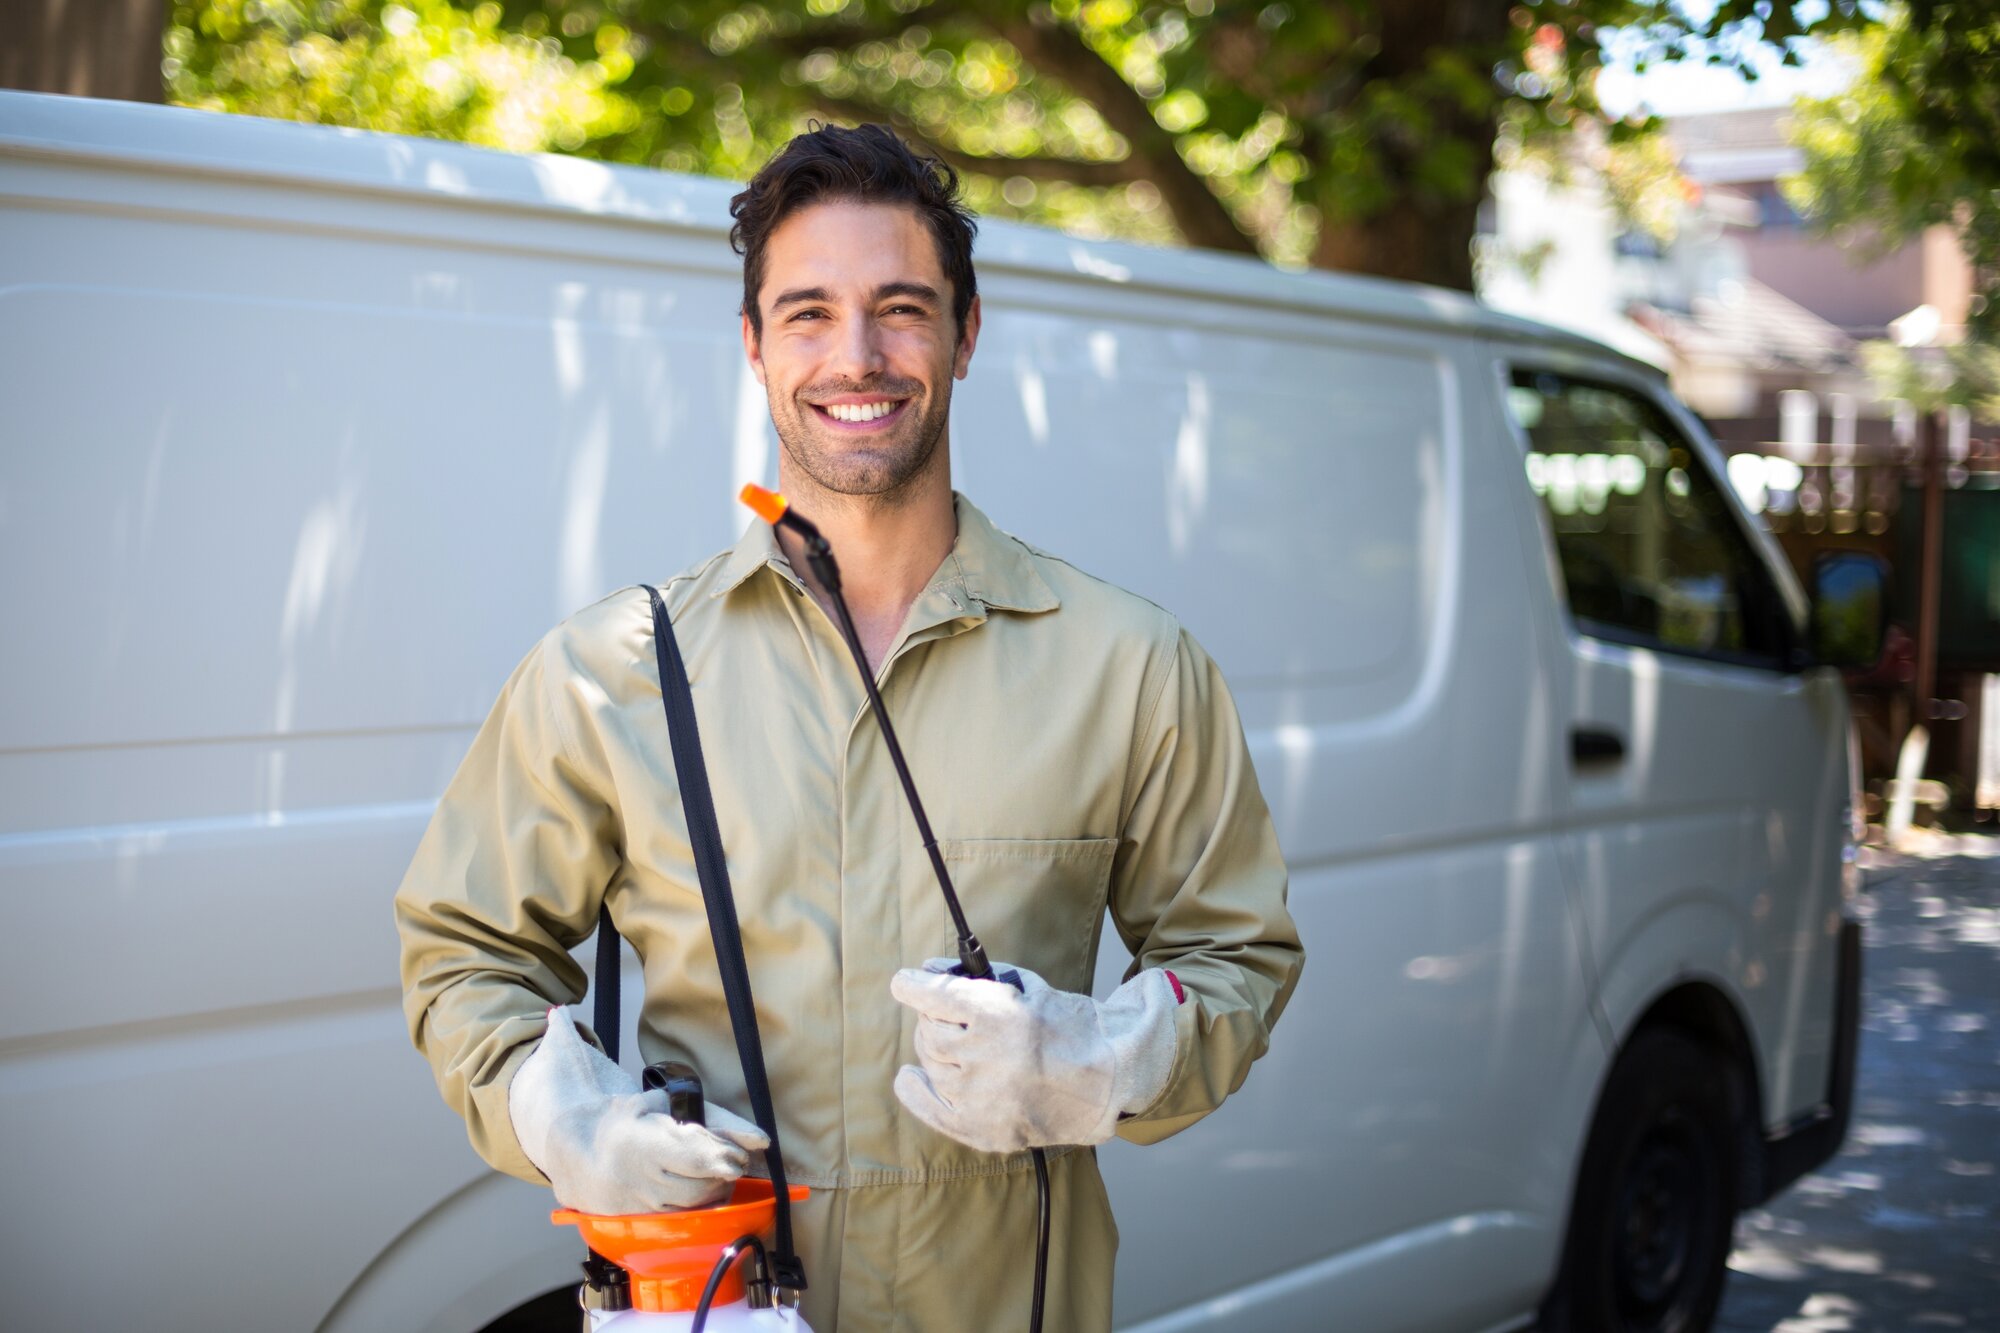 Smiling worker with pesticide sprayer and van on the back